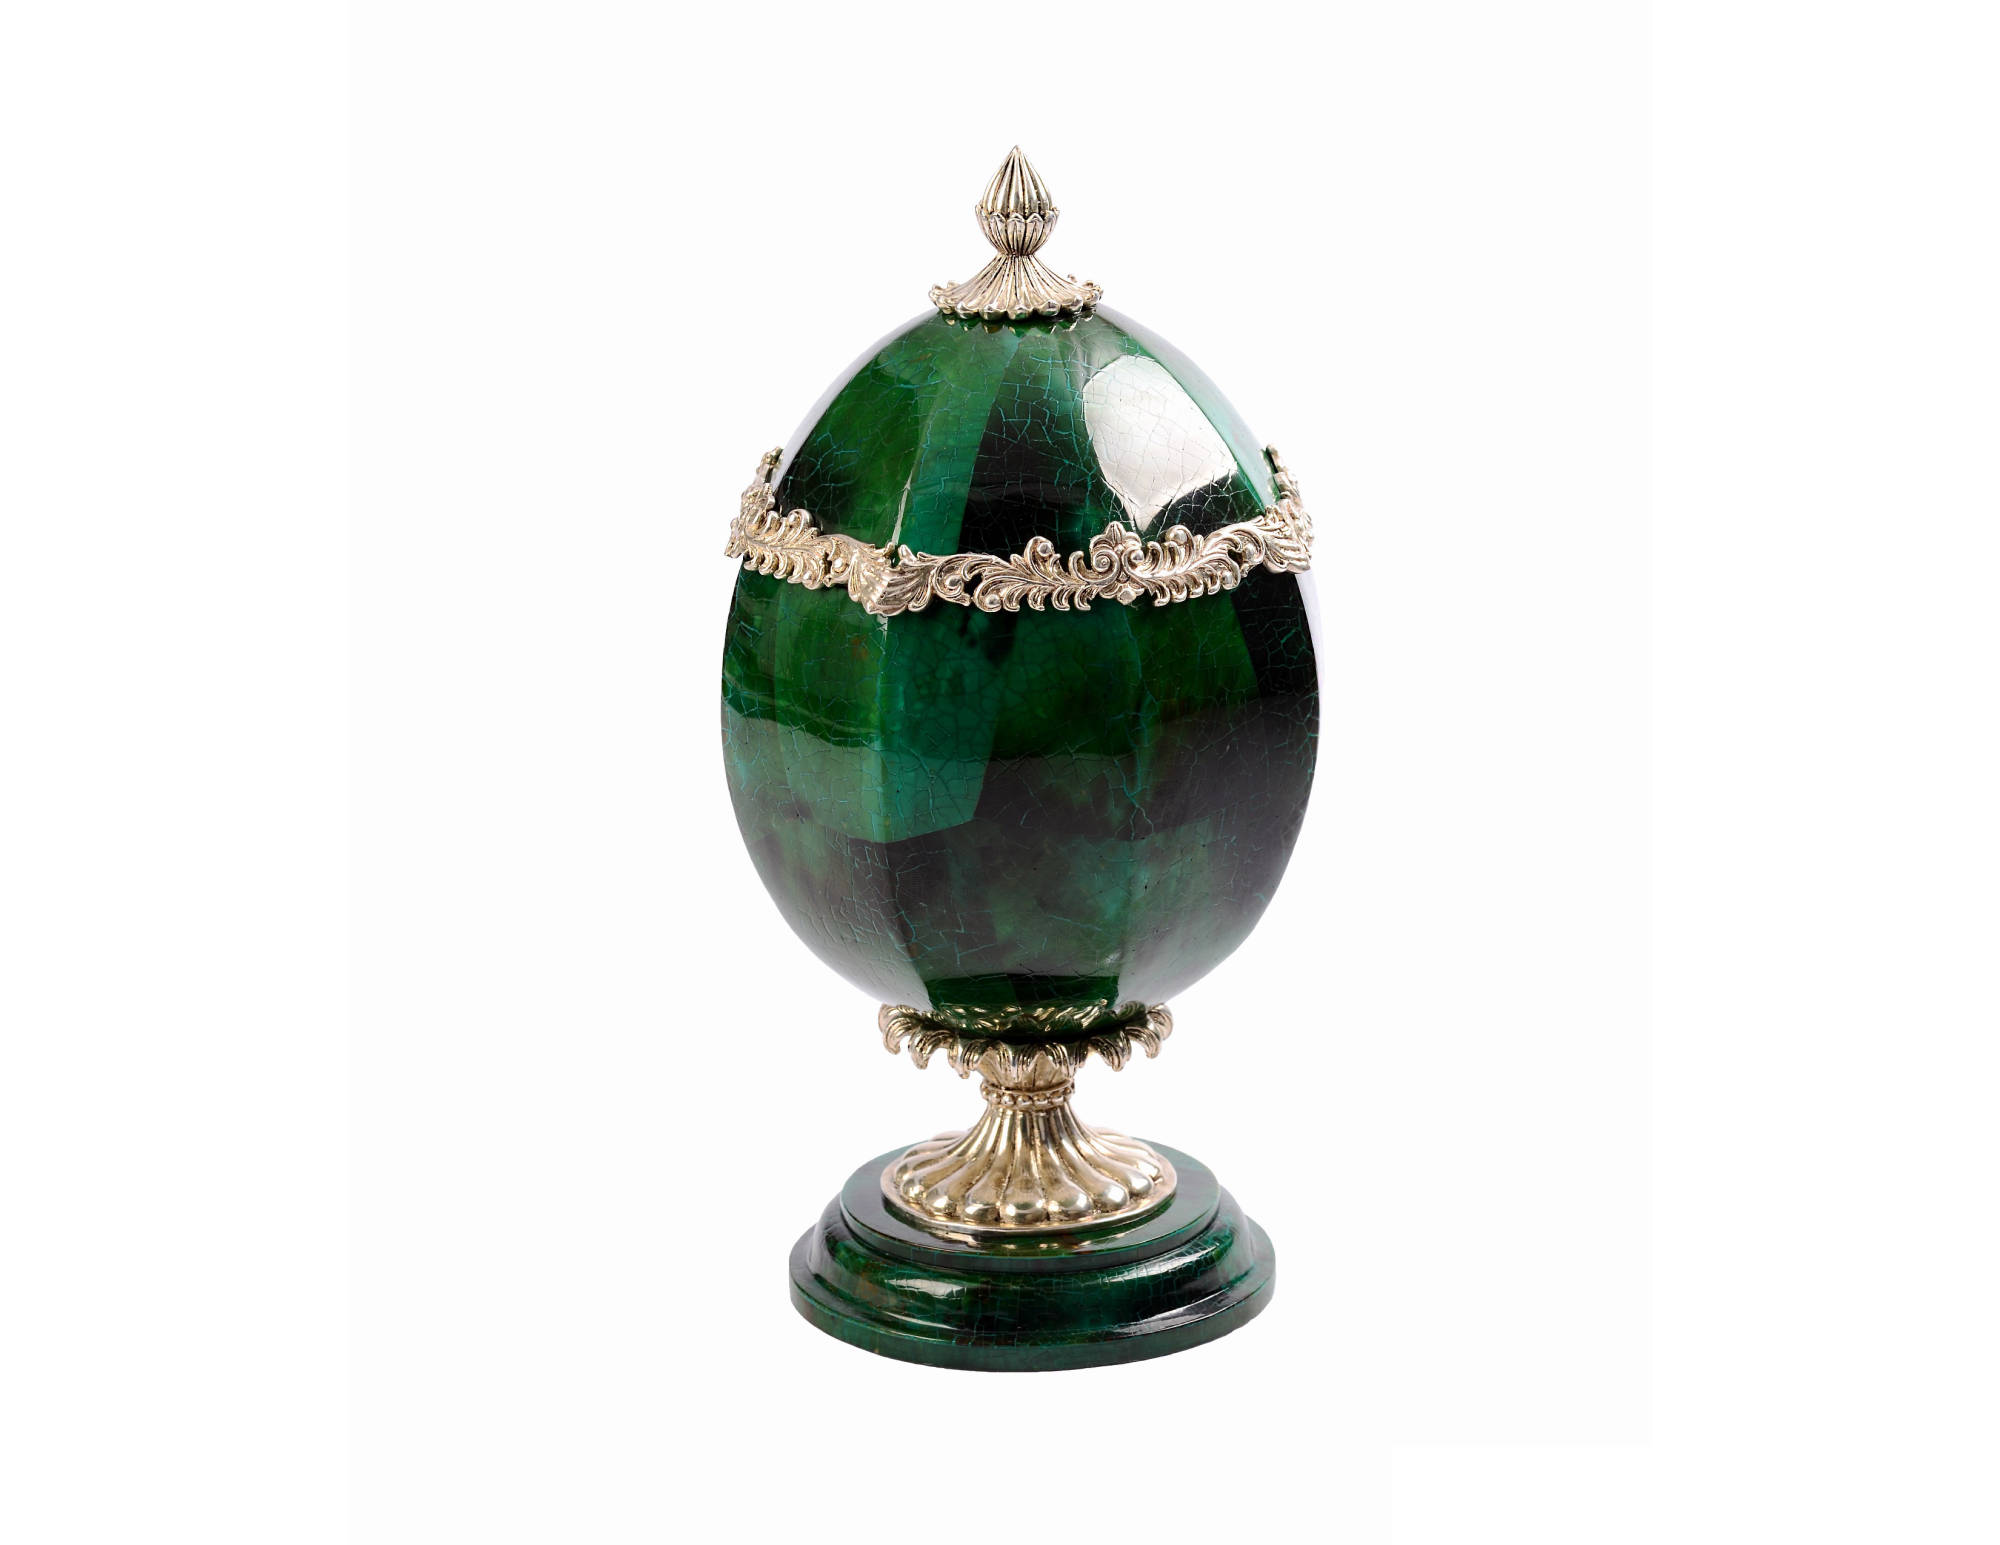 Green tiger penshell box & base with decor trim handle and stand